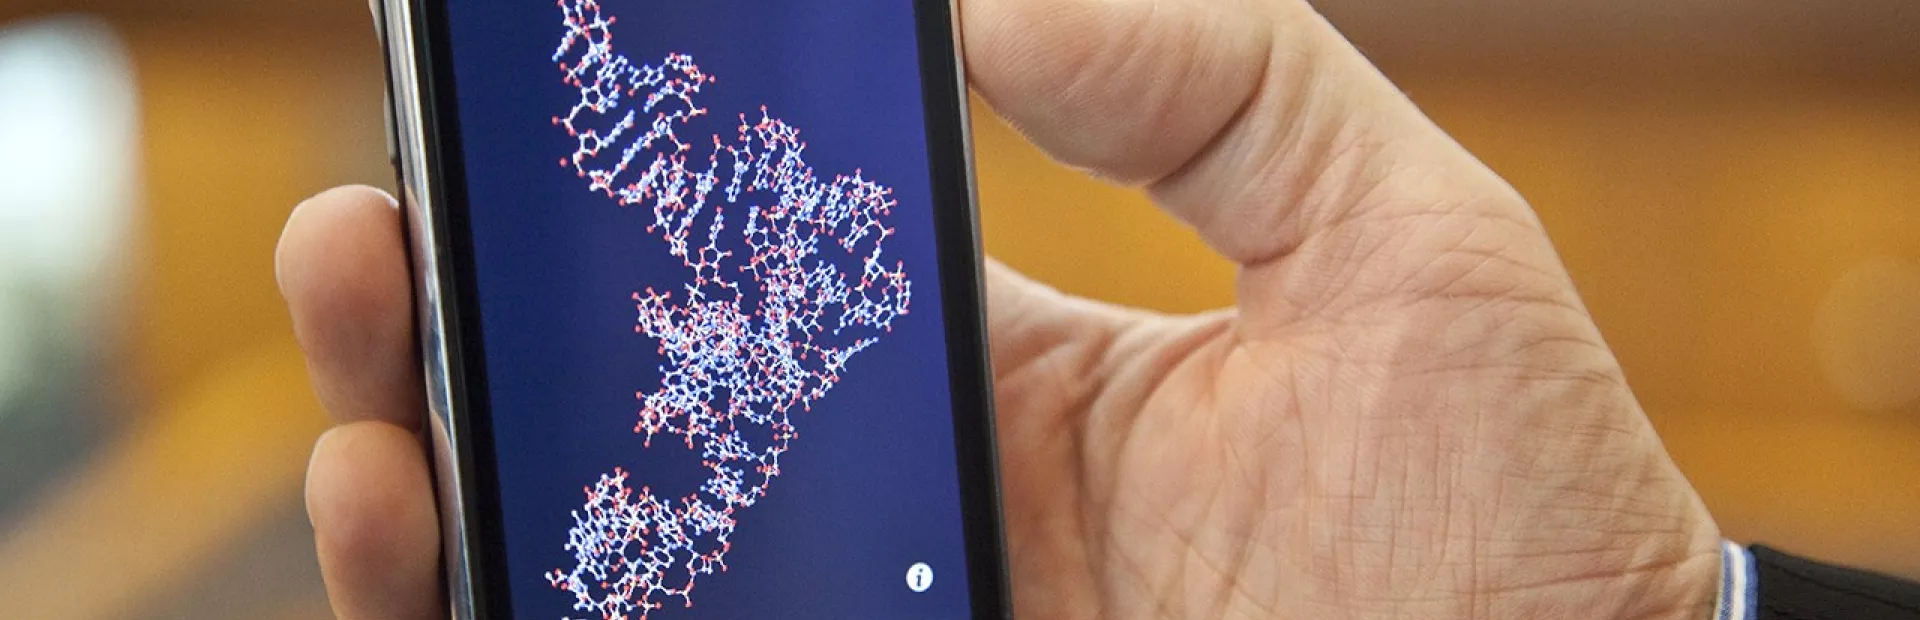 Smartphone displaying cell structure